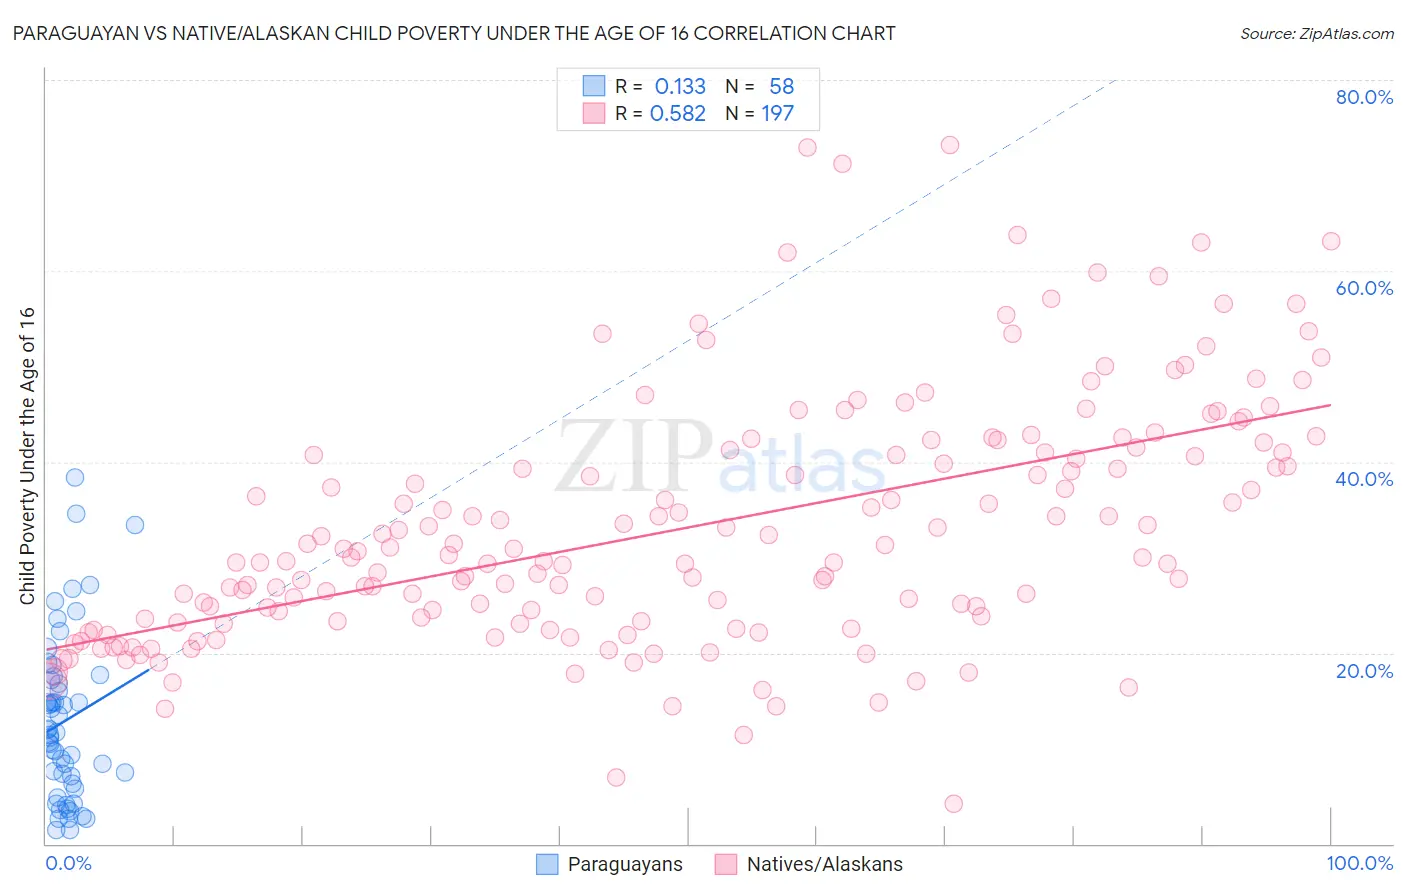 Paraguayan vs Native/Alaskan Child Poverty Under the Age of 16